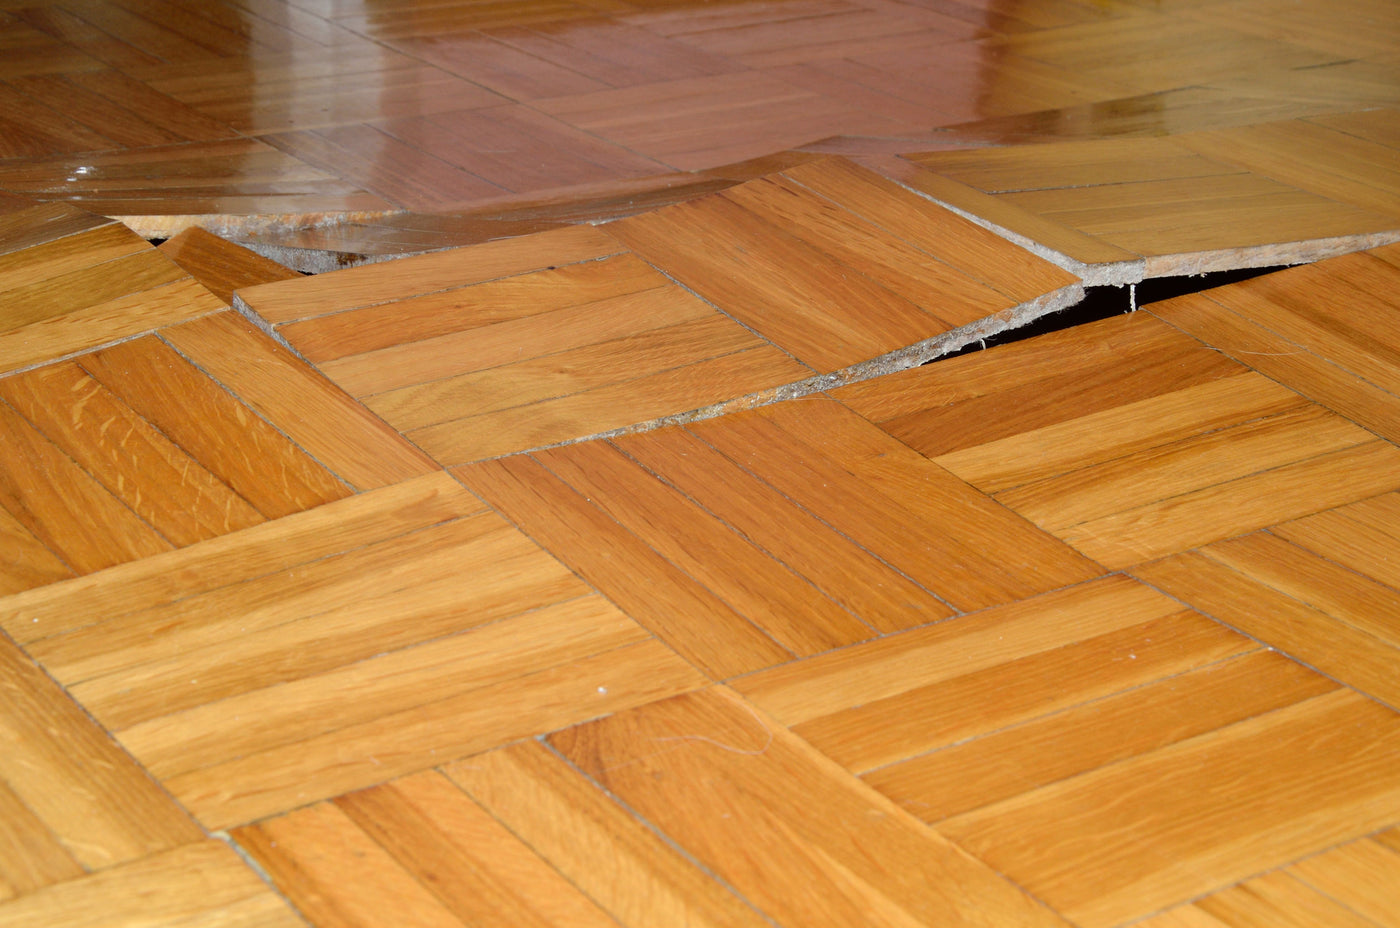 How To Fix A Buckled Wood Floor